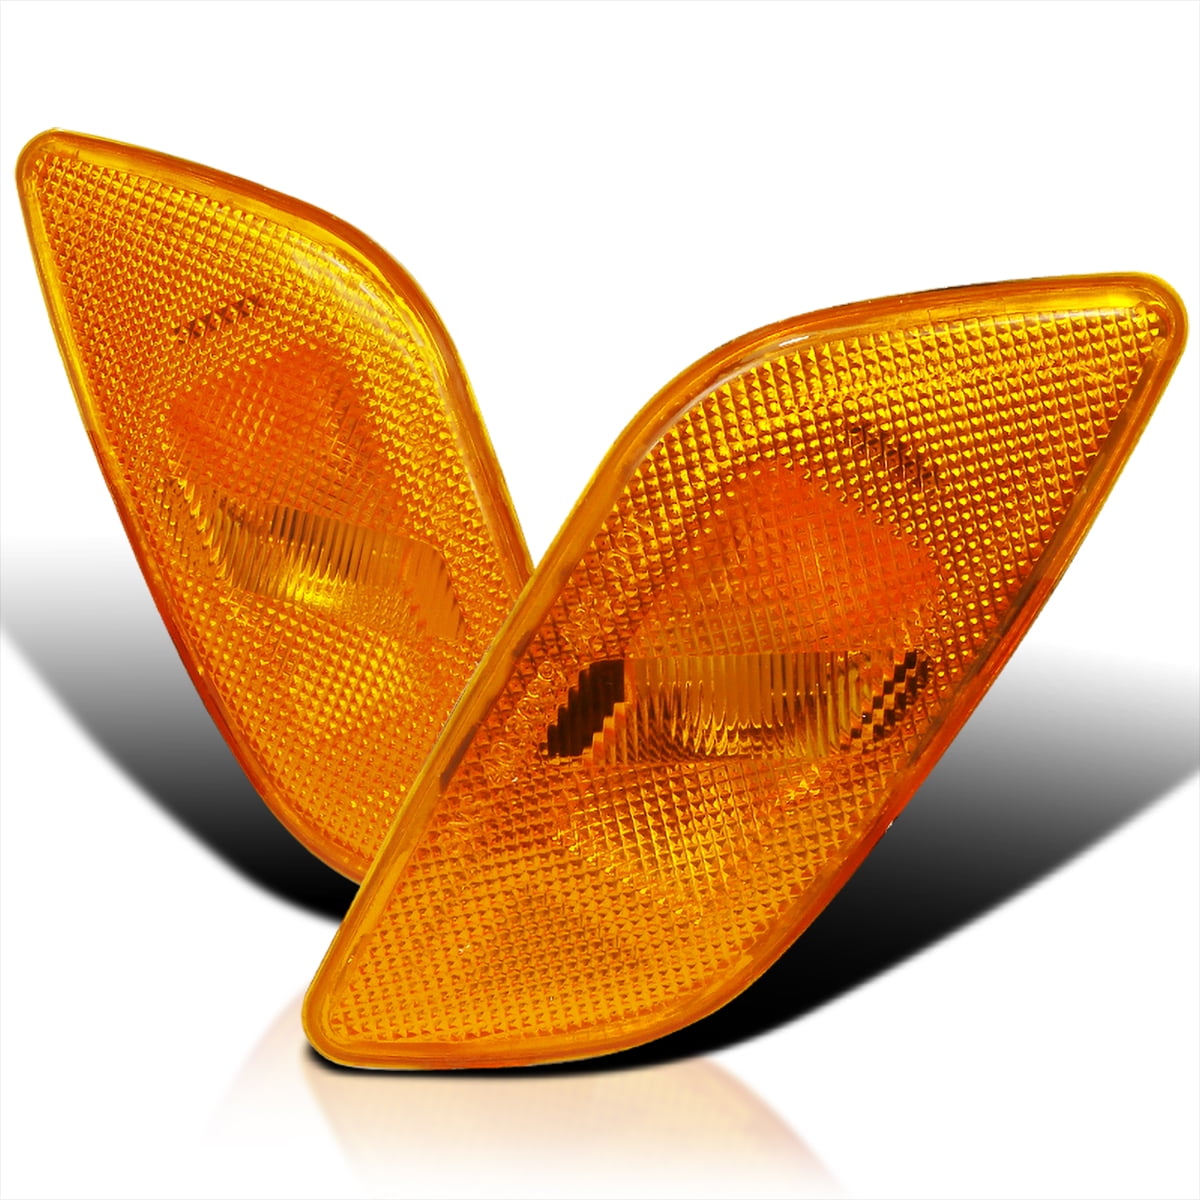 Spec-D Tuning Amber Lens Front Side Marker Lights for 2002-2003 Impreza WRX Rs Turn Signal Lamps Assembly Left Right Pair 